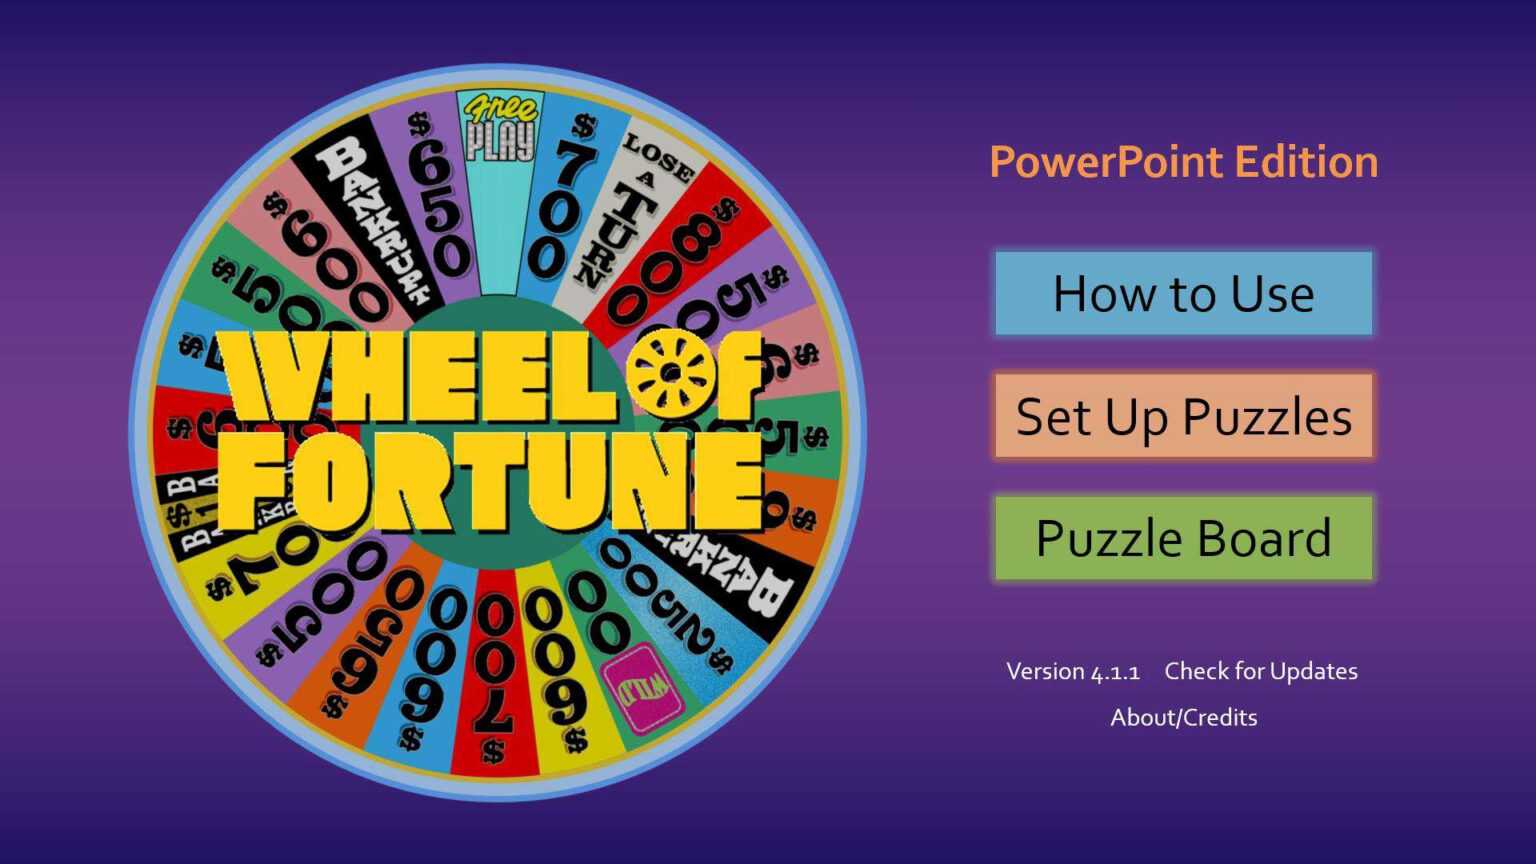 wheel-of-fortune-for-powerpoint-version-4-0-beta-2-games-by-tim